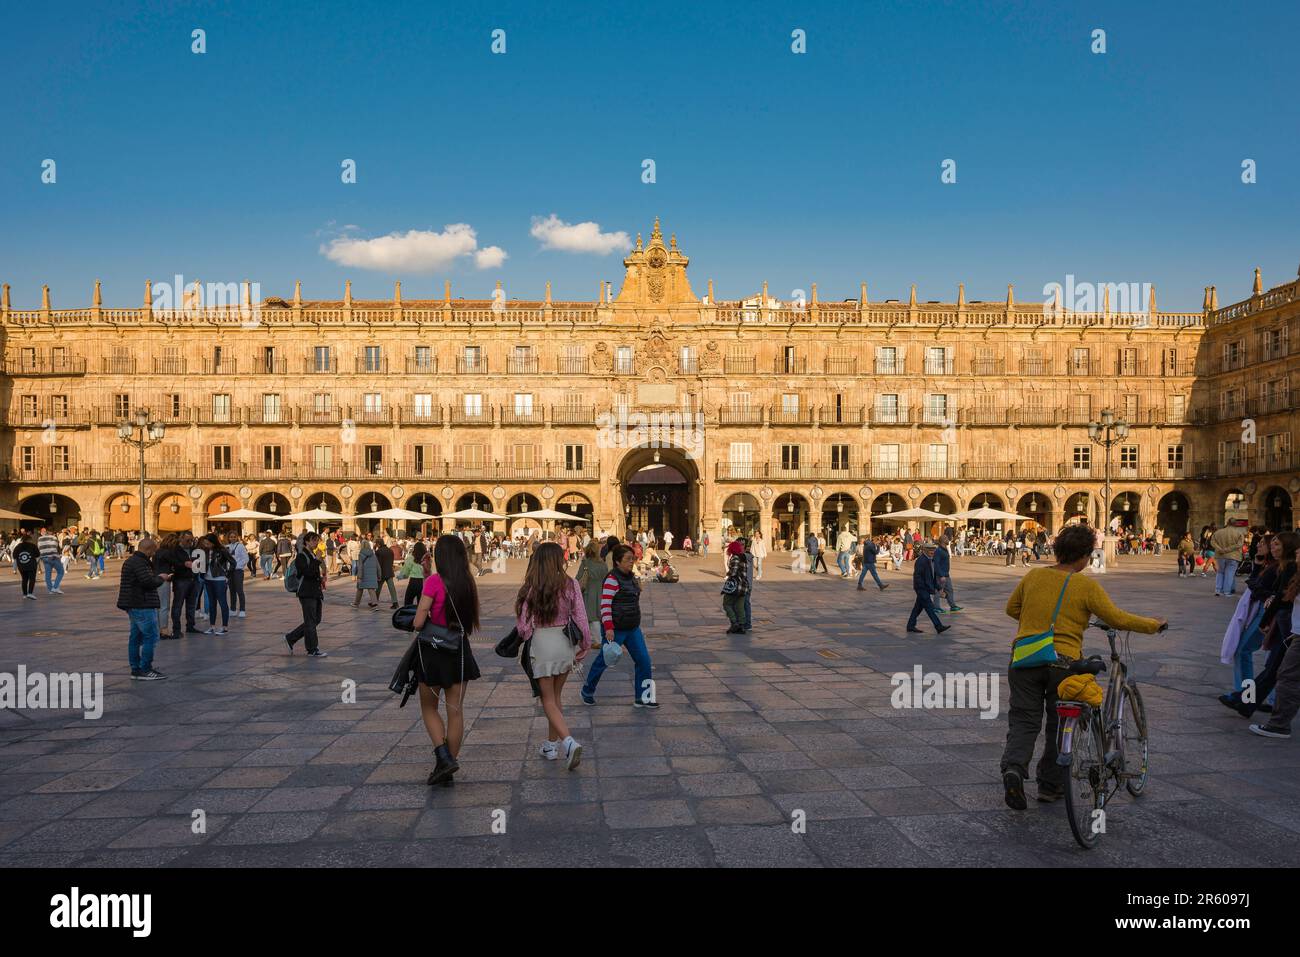 Baroque Europe, view of people walking at sunset in the magnificent Baroque Plaza Mayor in the historic Spanish city of Salamanca, central Spain Stock Photo